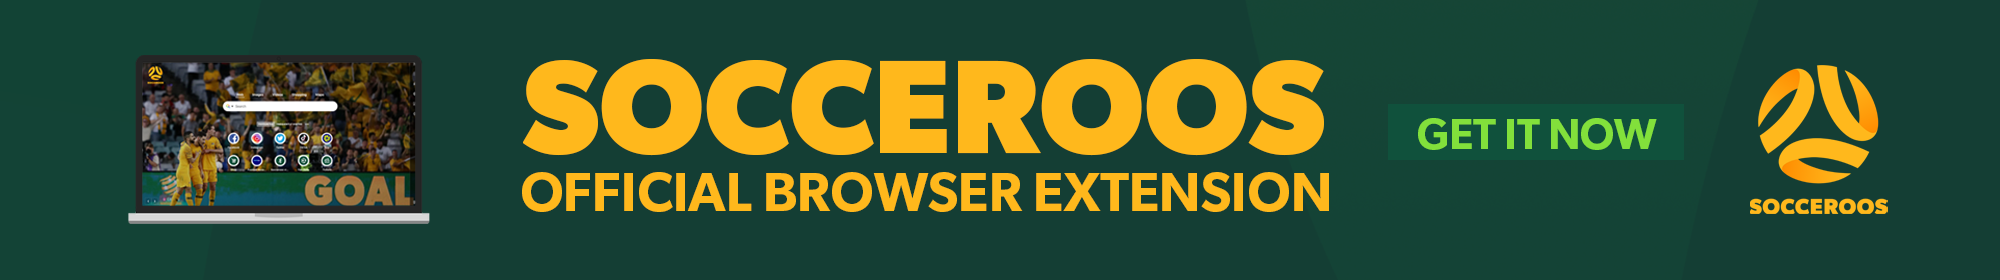 Socceroos Browser Extension Thin Banner